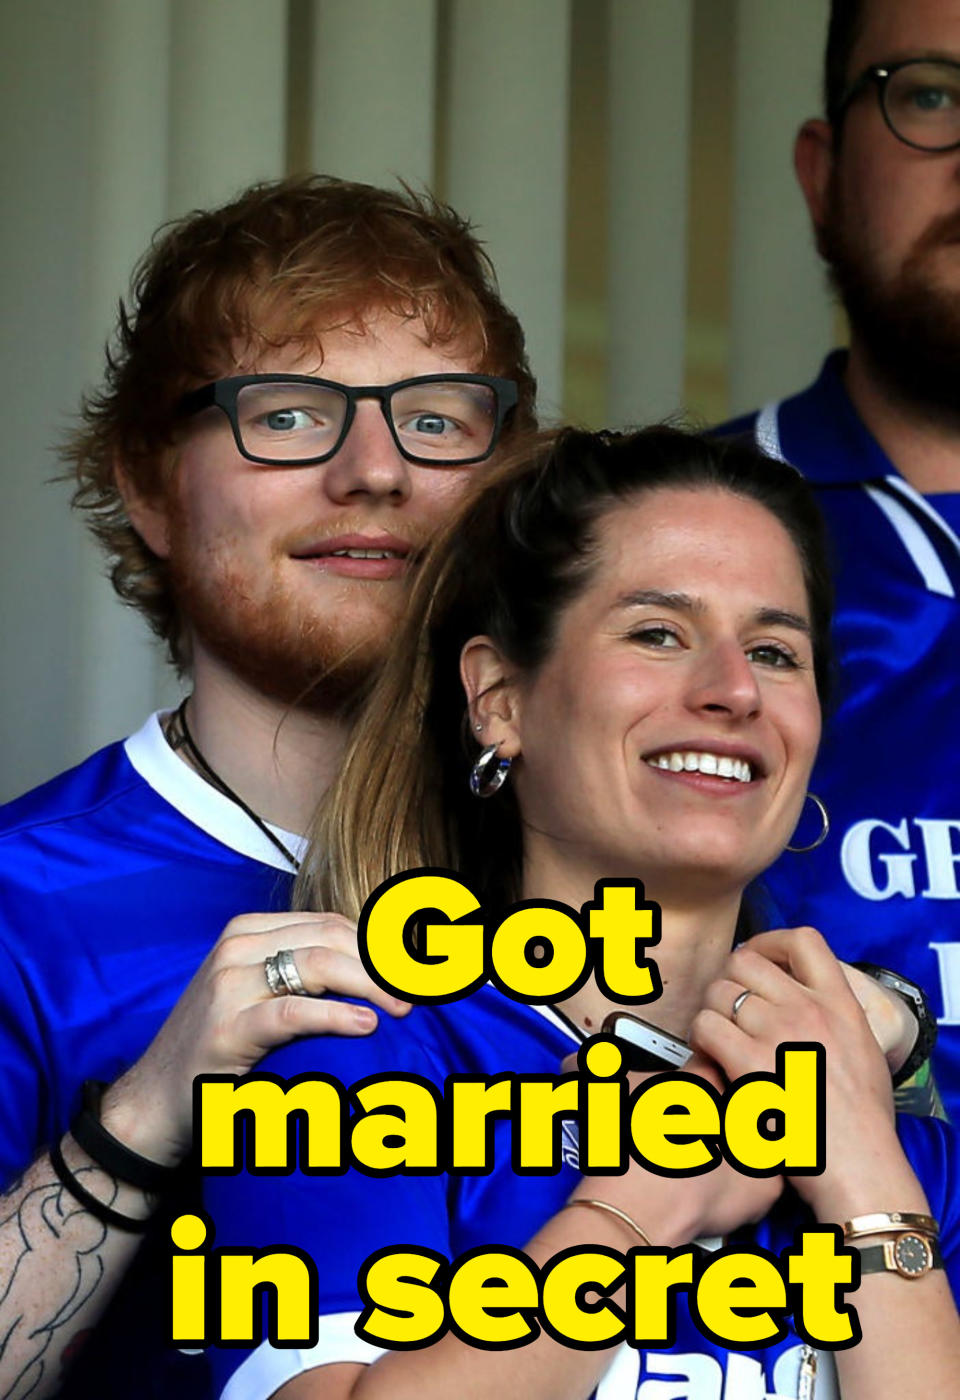 Picture of Ed and Cherry at a sports game labeled "got married in secret"